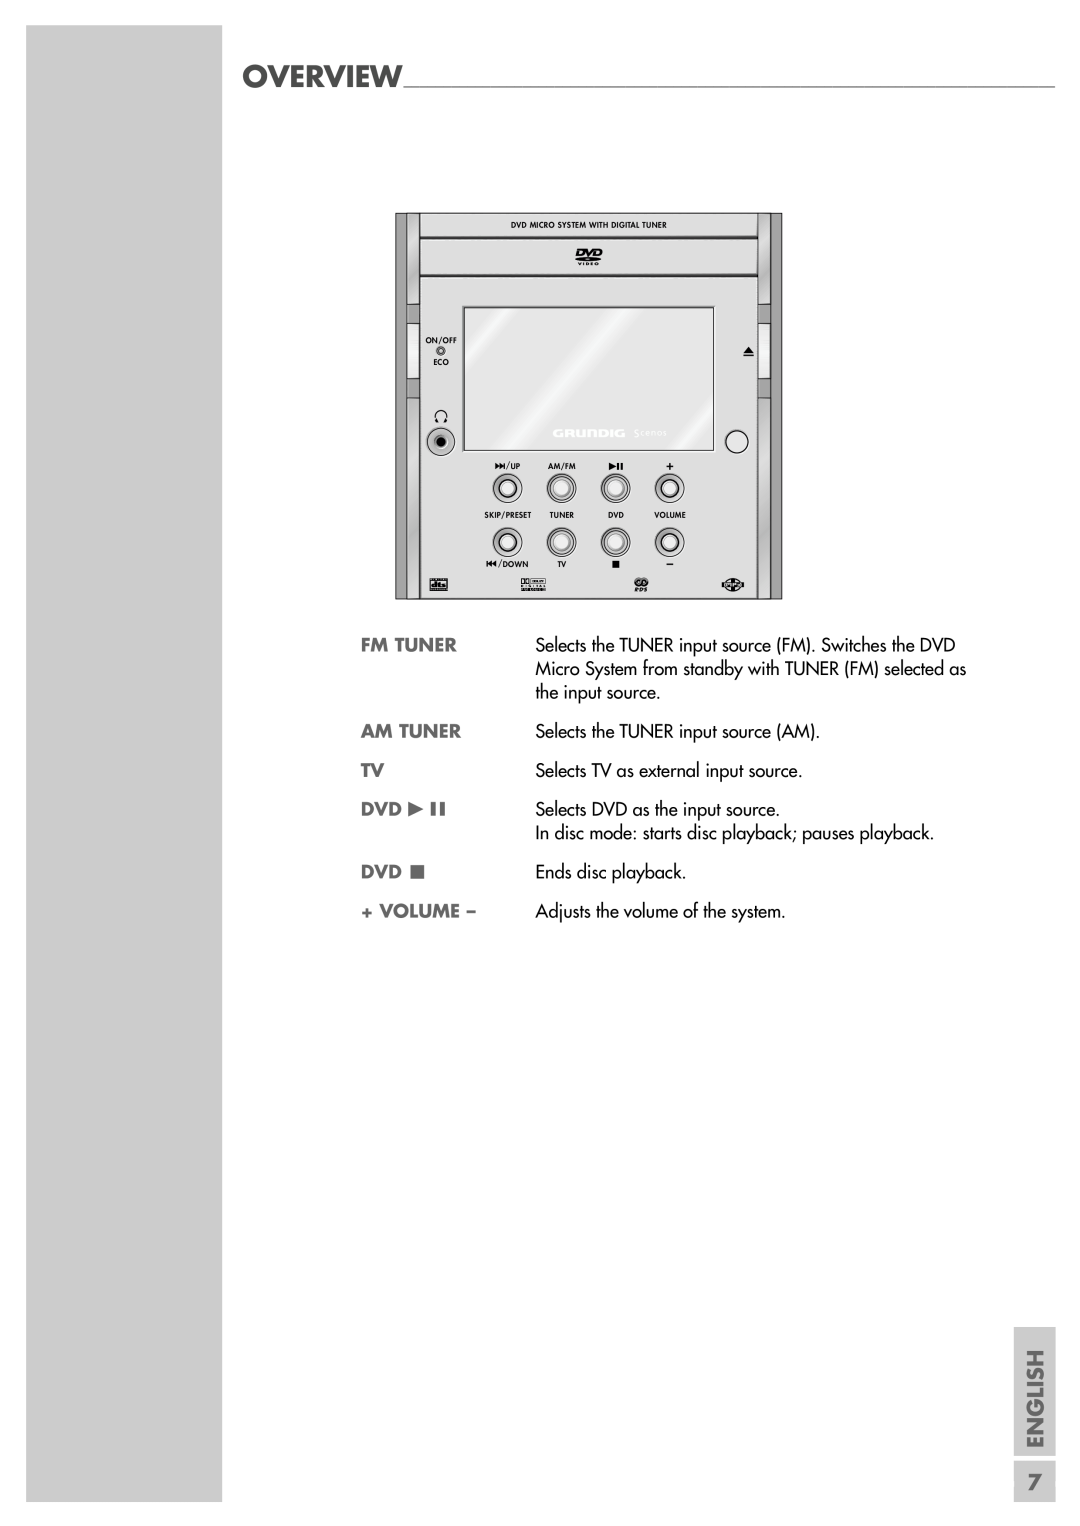 Grundig Scenos UMS 6400 DVD manual English, Selects the TUNER input source FM. Switches the DVD, Overview 